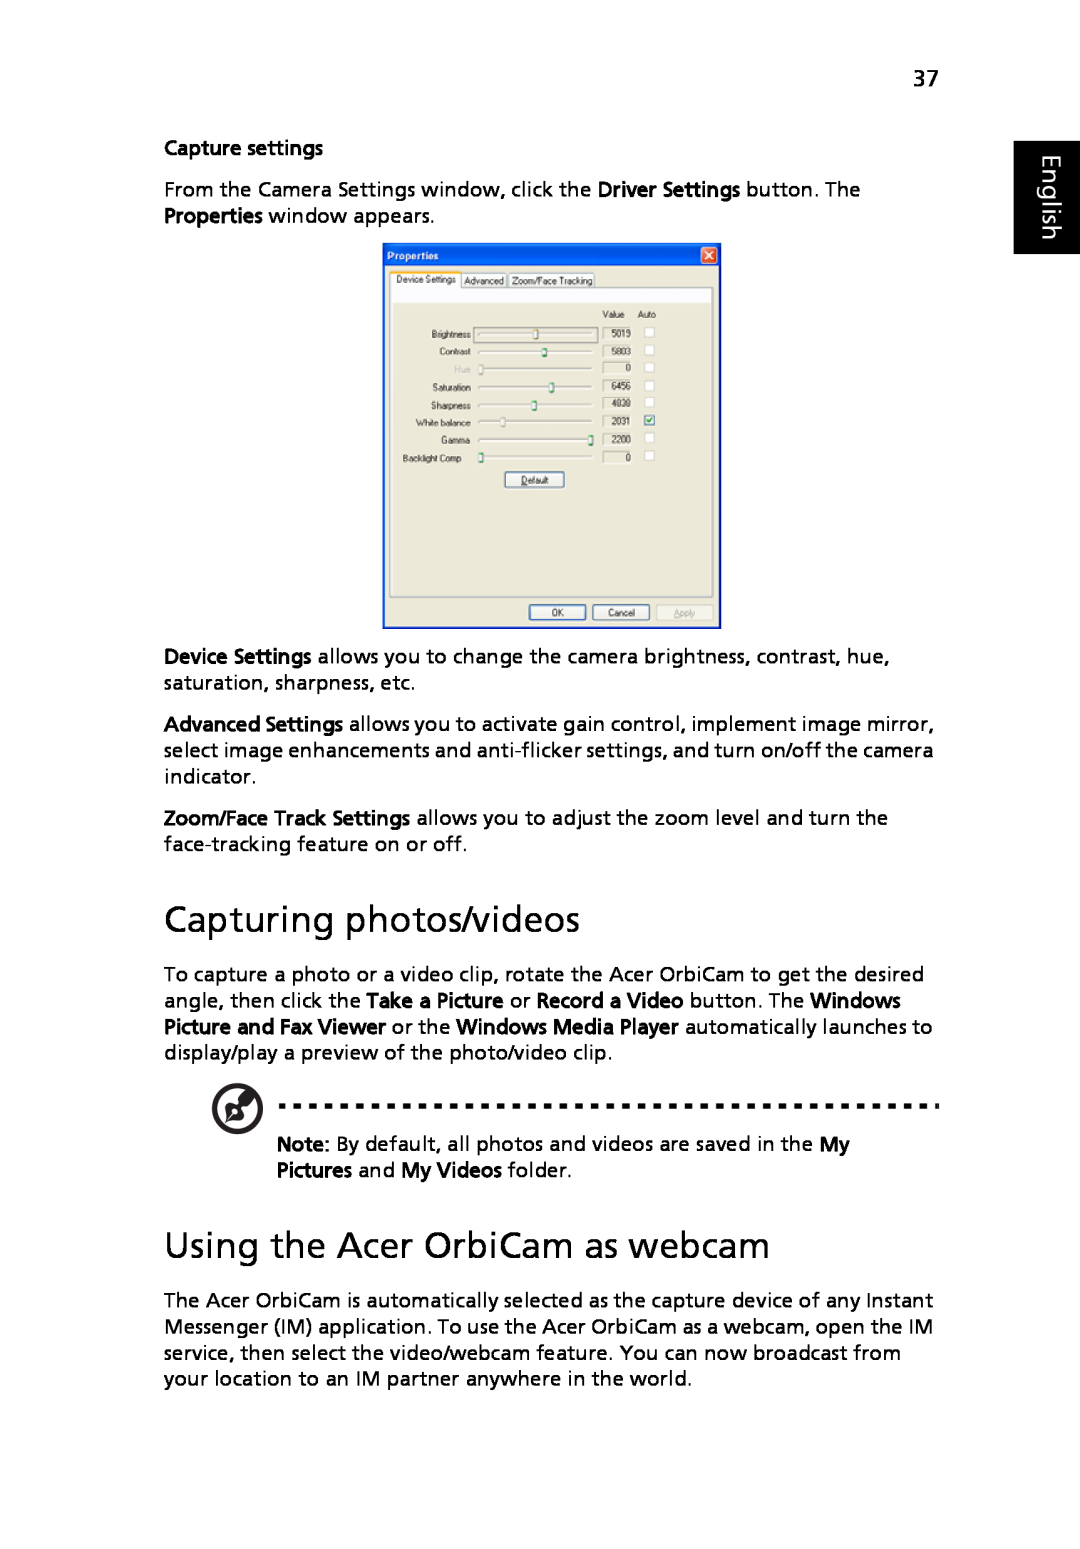 Acer 3040 Series, 3030 Series manual Capturing photos/videos, Using the Acer OrbiCam as webcam, English, Capture settings 